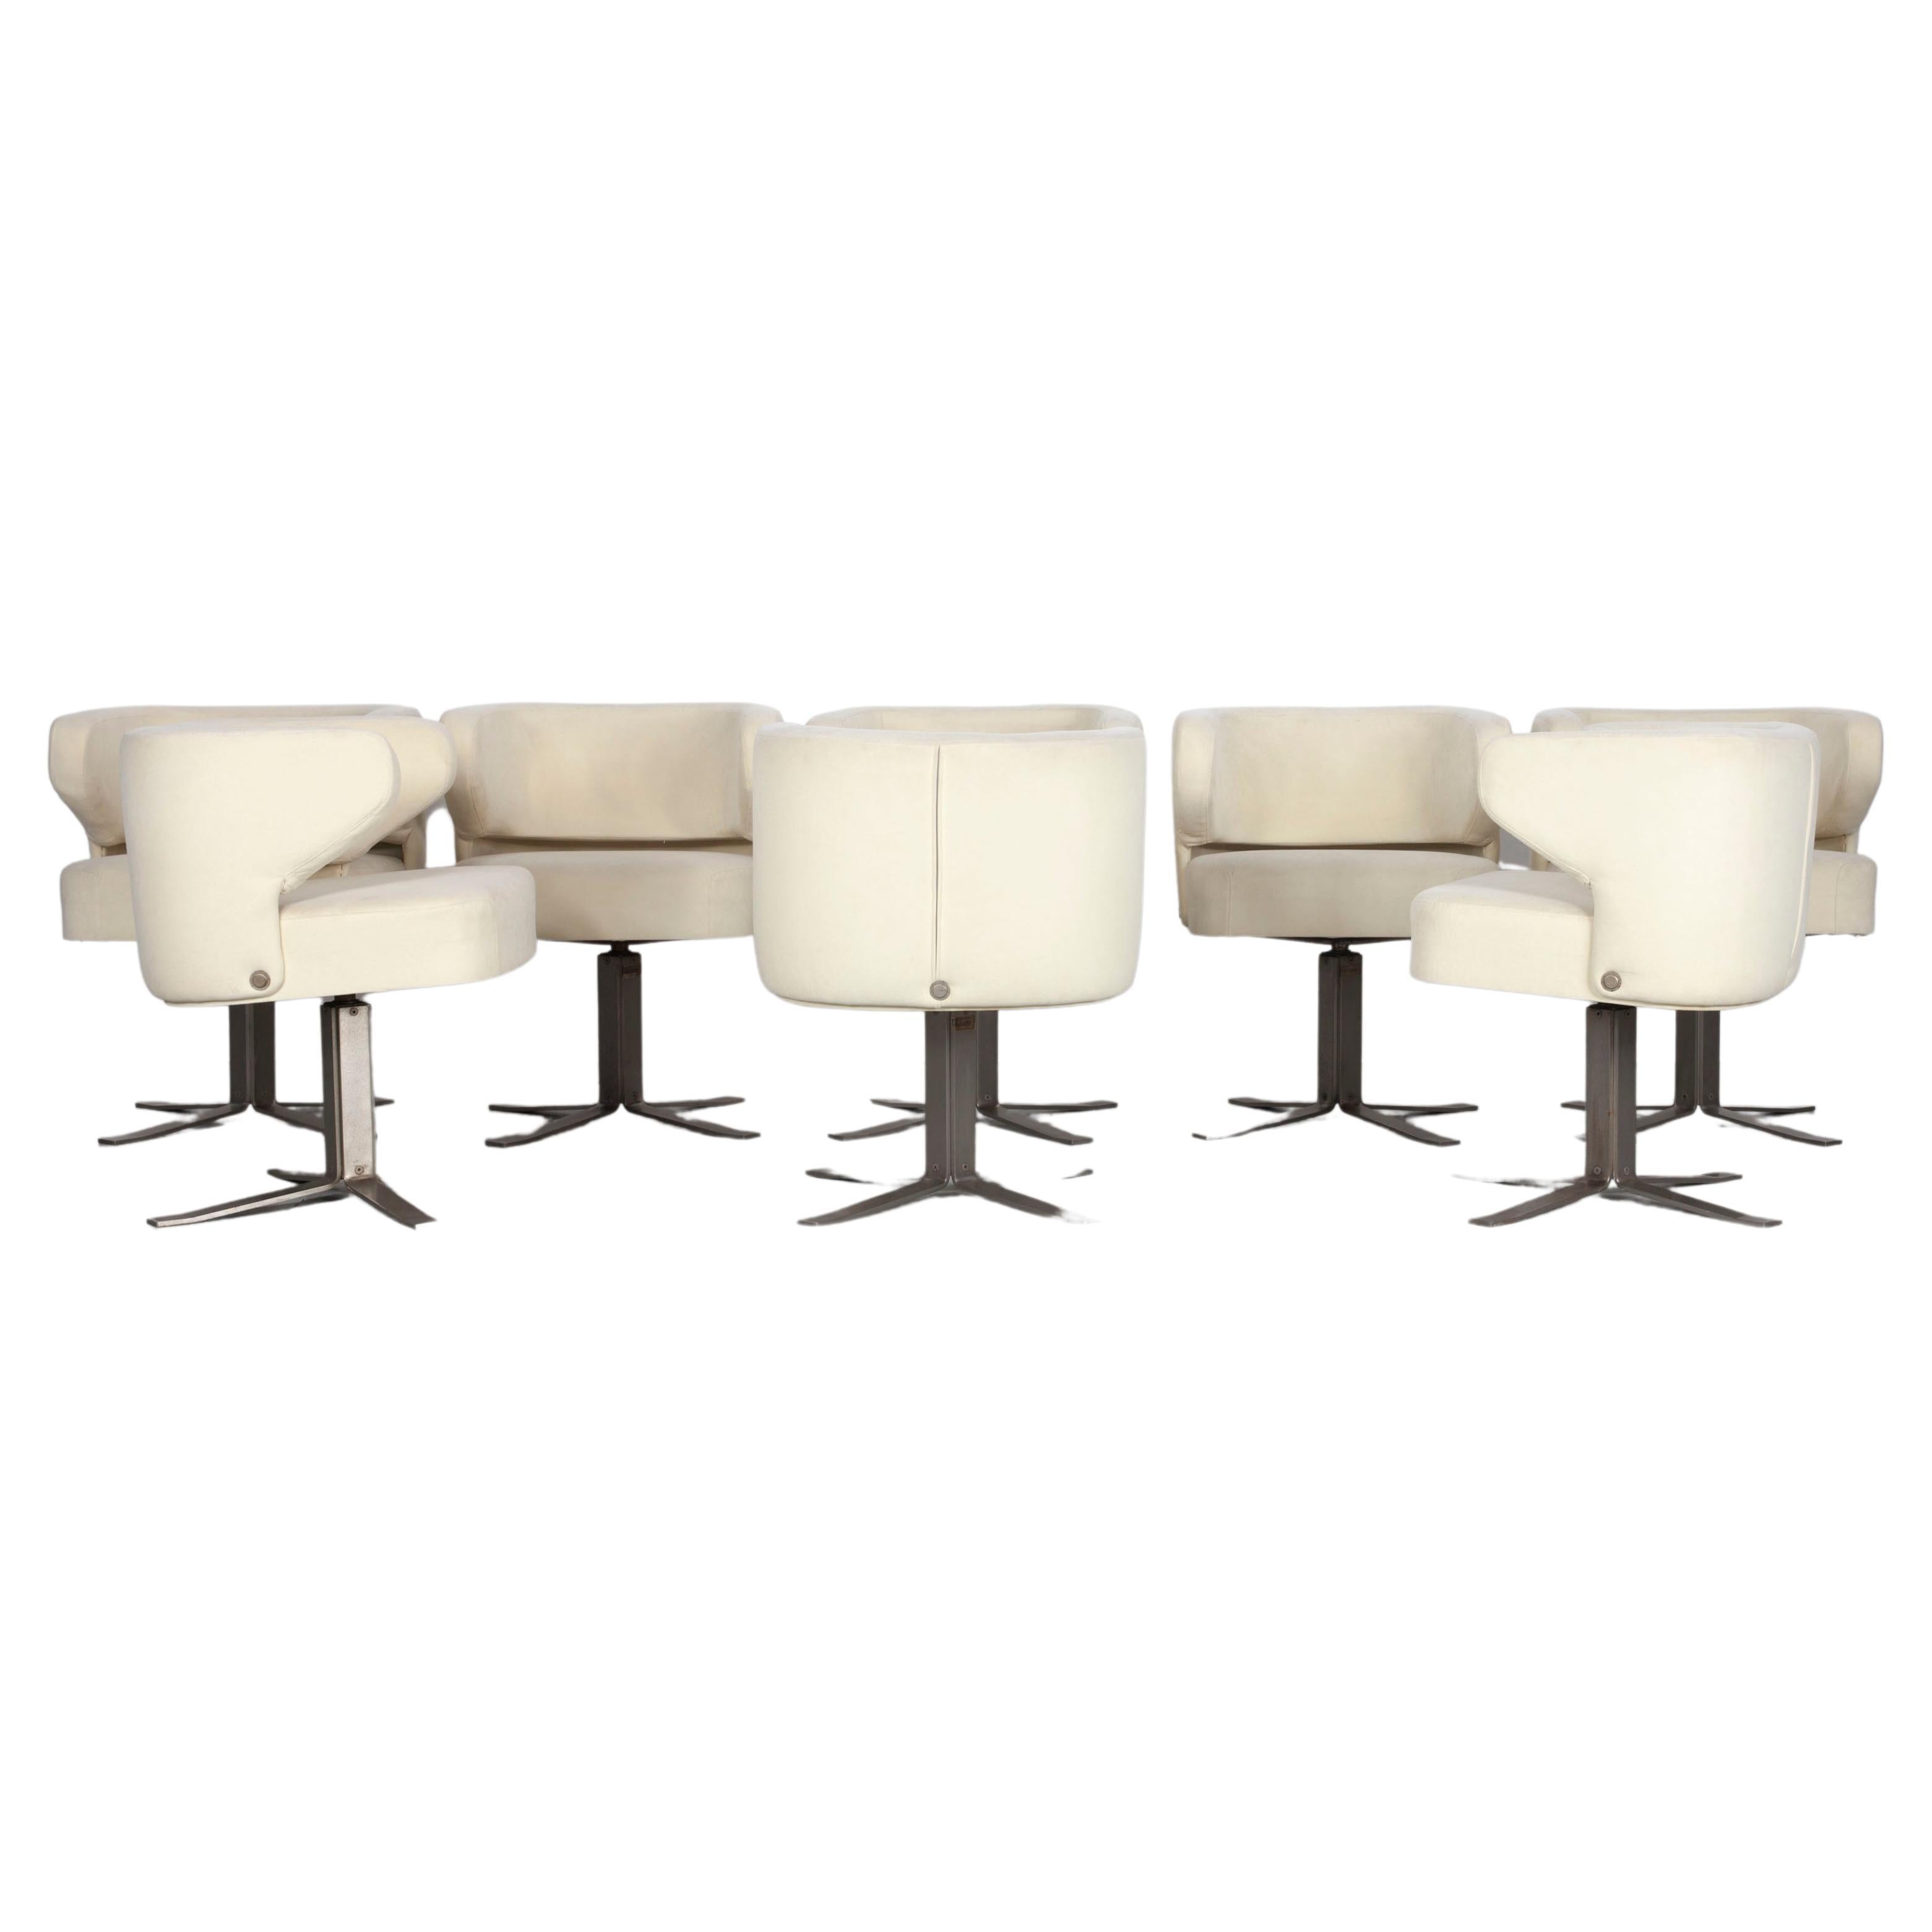 Set of 8 Formanova "Ponney" Swivel Chairs, Designed by Gianni Moscatelli, Italy For Sale